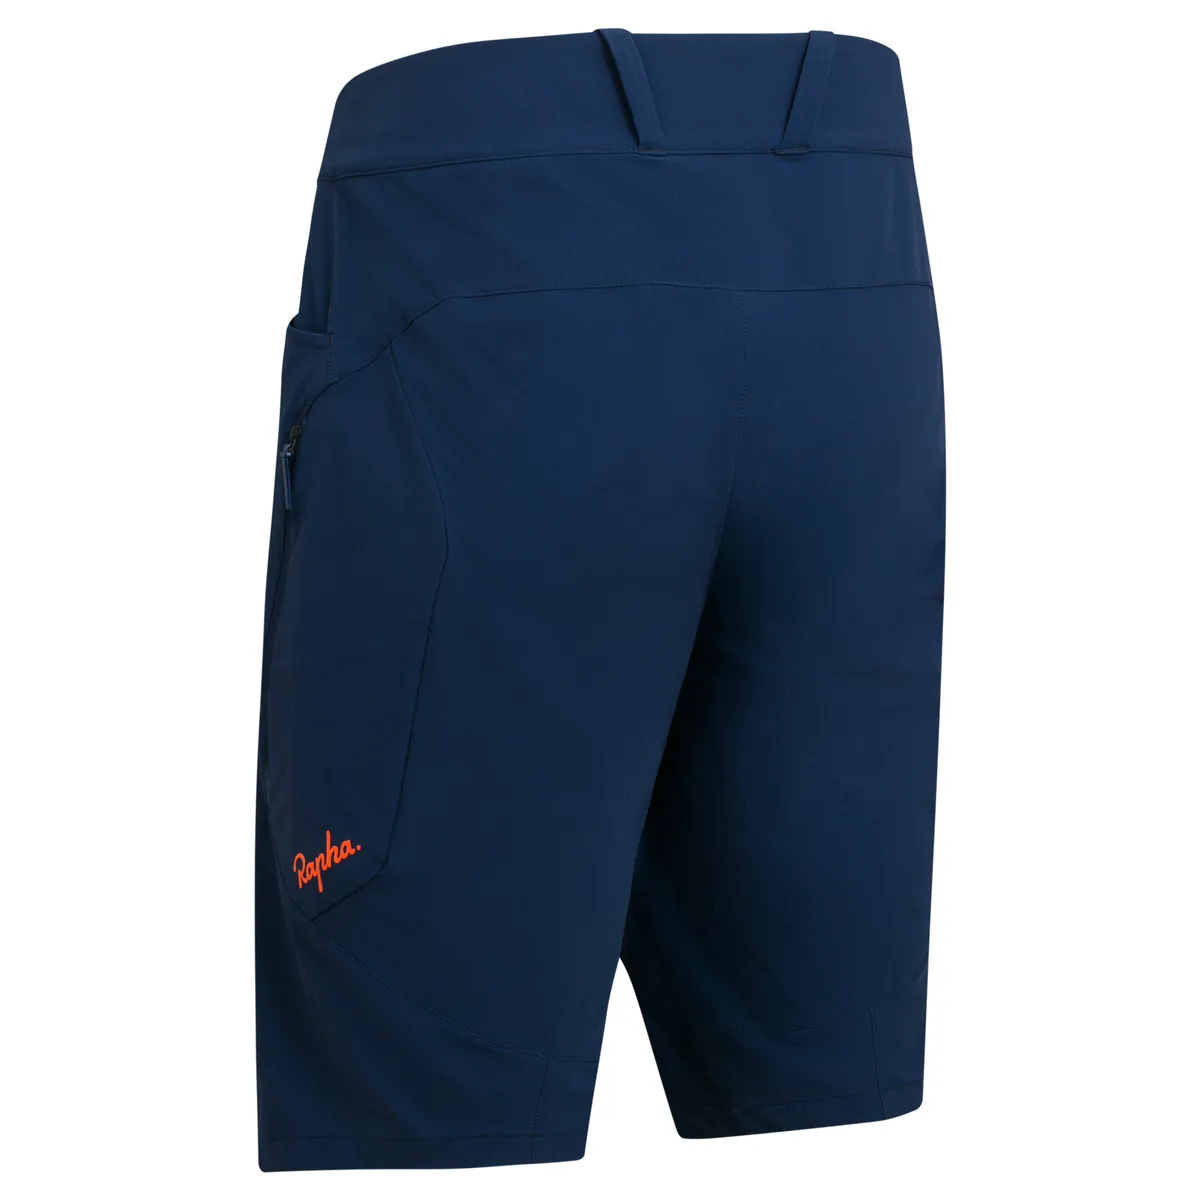 Rapha Trail Shorts in Pageant Blue, Scarlet Ibis